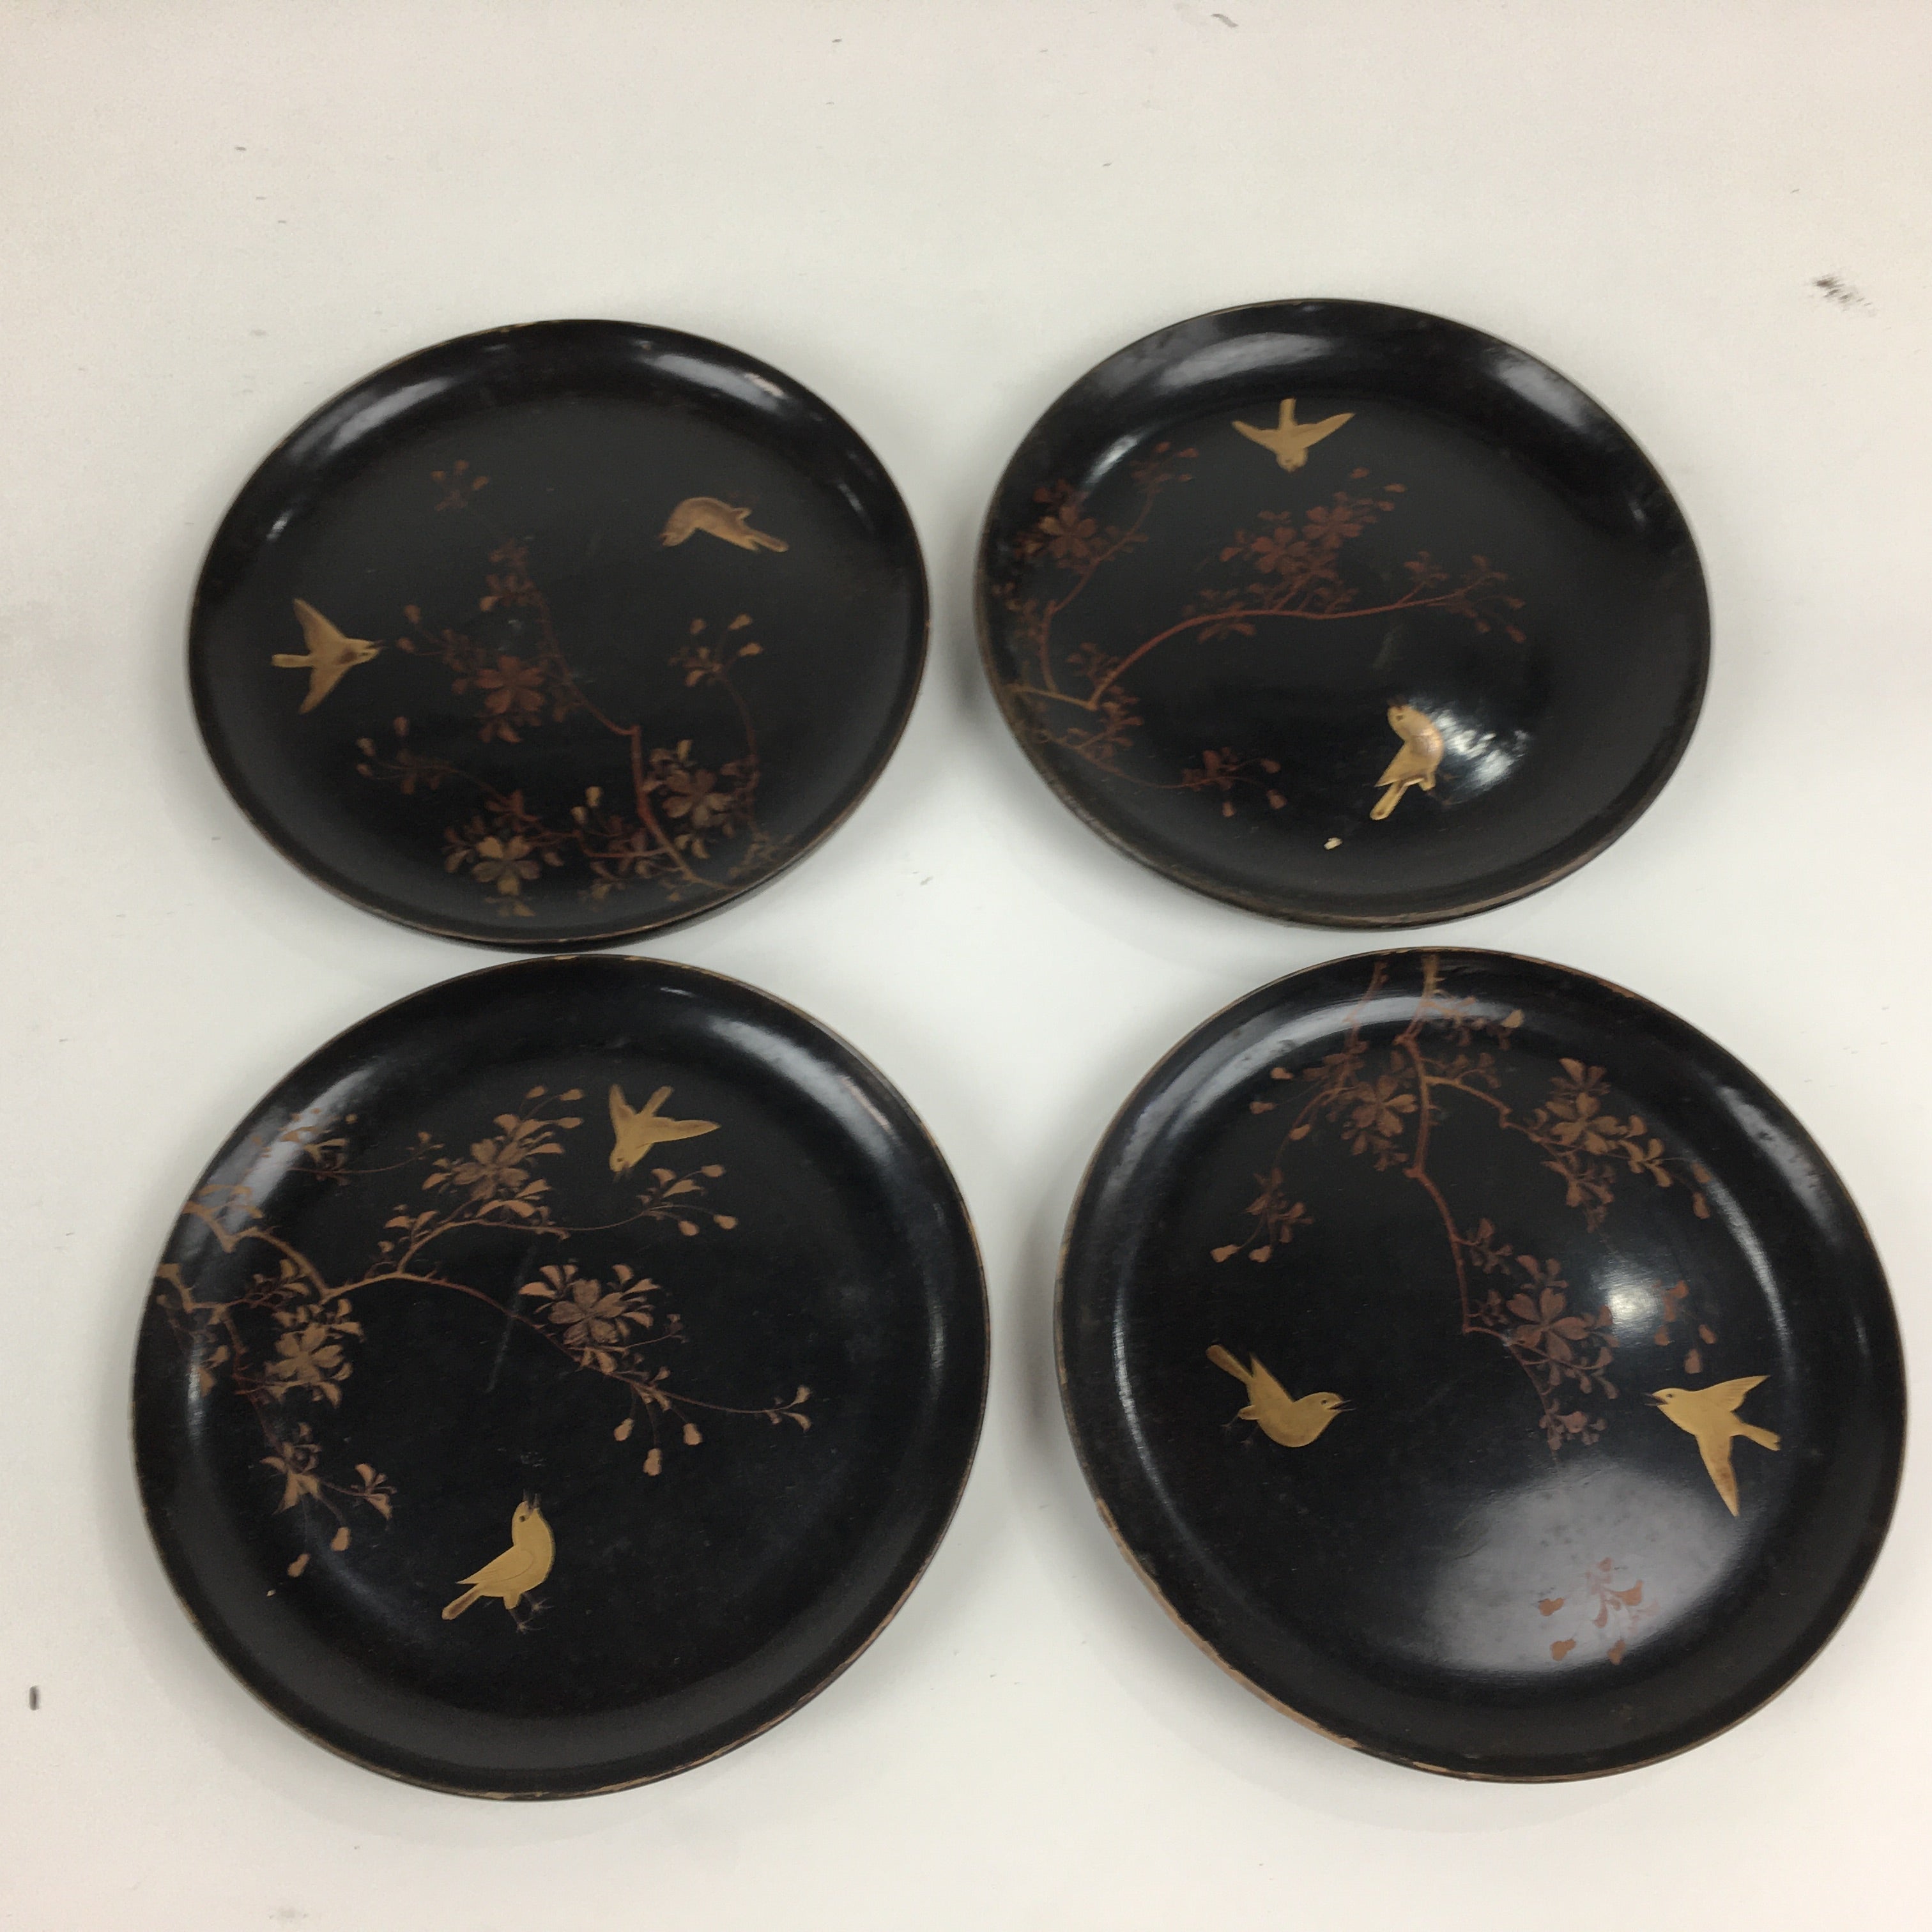 Antique Japanese Wooden Lacquered Plate Makie 10 pc Set C1880 Bird Black PX586